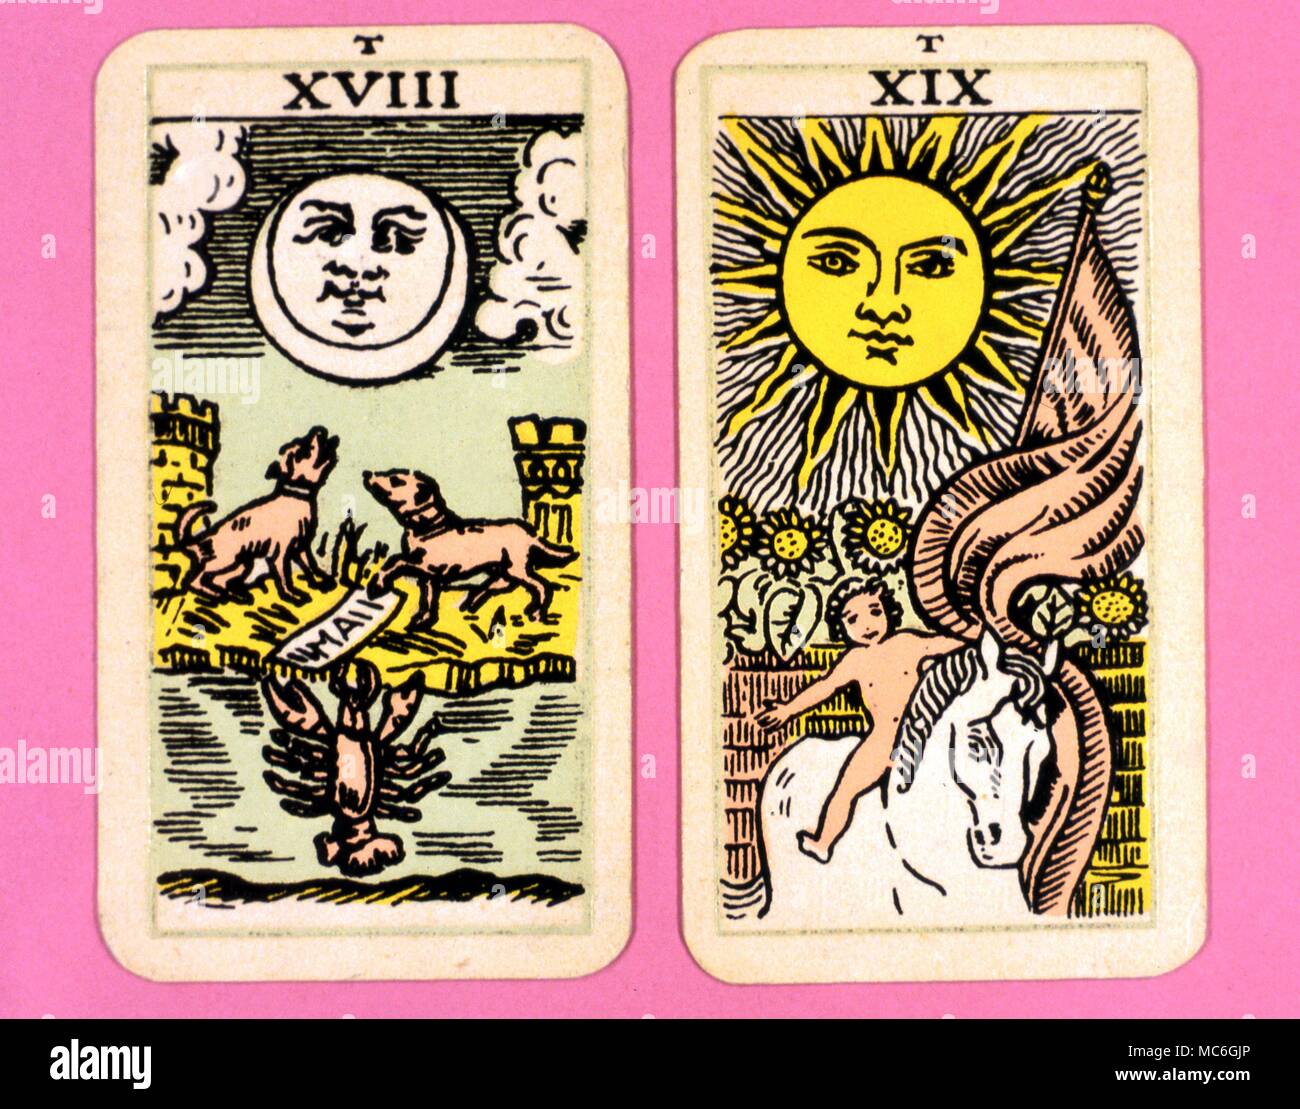 Tarot Cards-Majo Arcana- The Parisian Tarot. Card 18. The Moon, and Card 19. The Sun. Two cards from a Major Arcana picture Tarot, probably designed in an archaizing style in loose imitation of the Rosicrucian deck designed by Pamela Coleman Smith, alongside A.E.Waite, and various earlier decks, such as that published by Encausse (Papus) in The Tarot of the Bohemians at the end of the 19th century, post 1905, but earlier than 1912. The name Parisian Tarot was given by the owner of the deck - it might however be called the Tau Tarot, from the intriguing letter Tau at the head of each card. Stock Photo